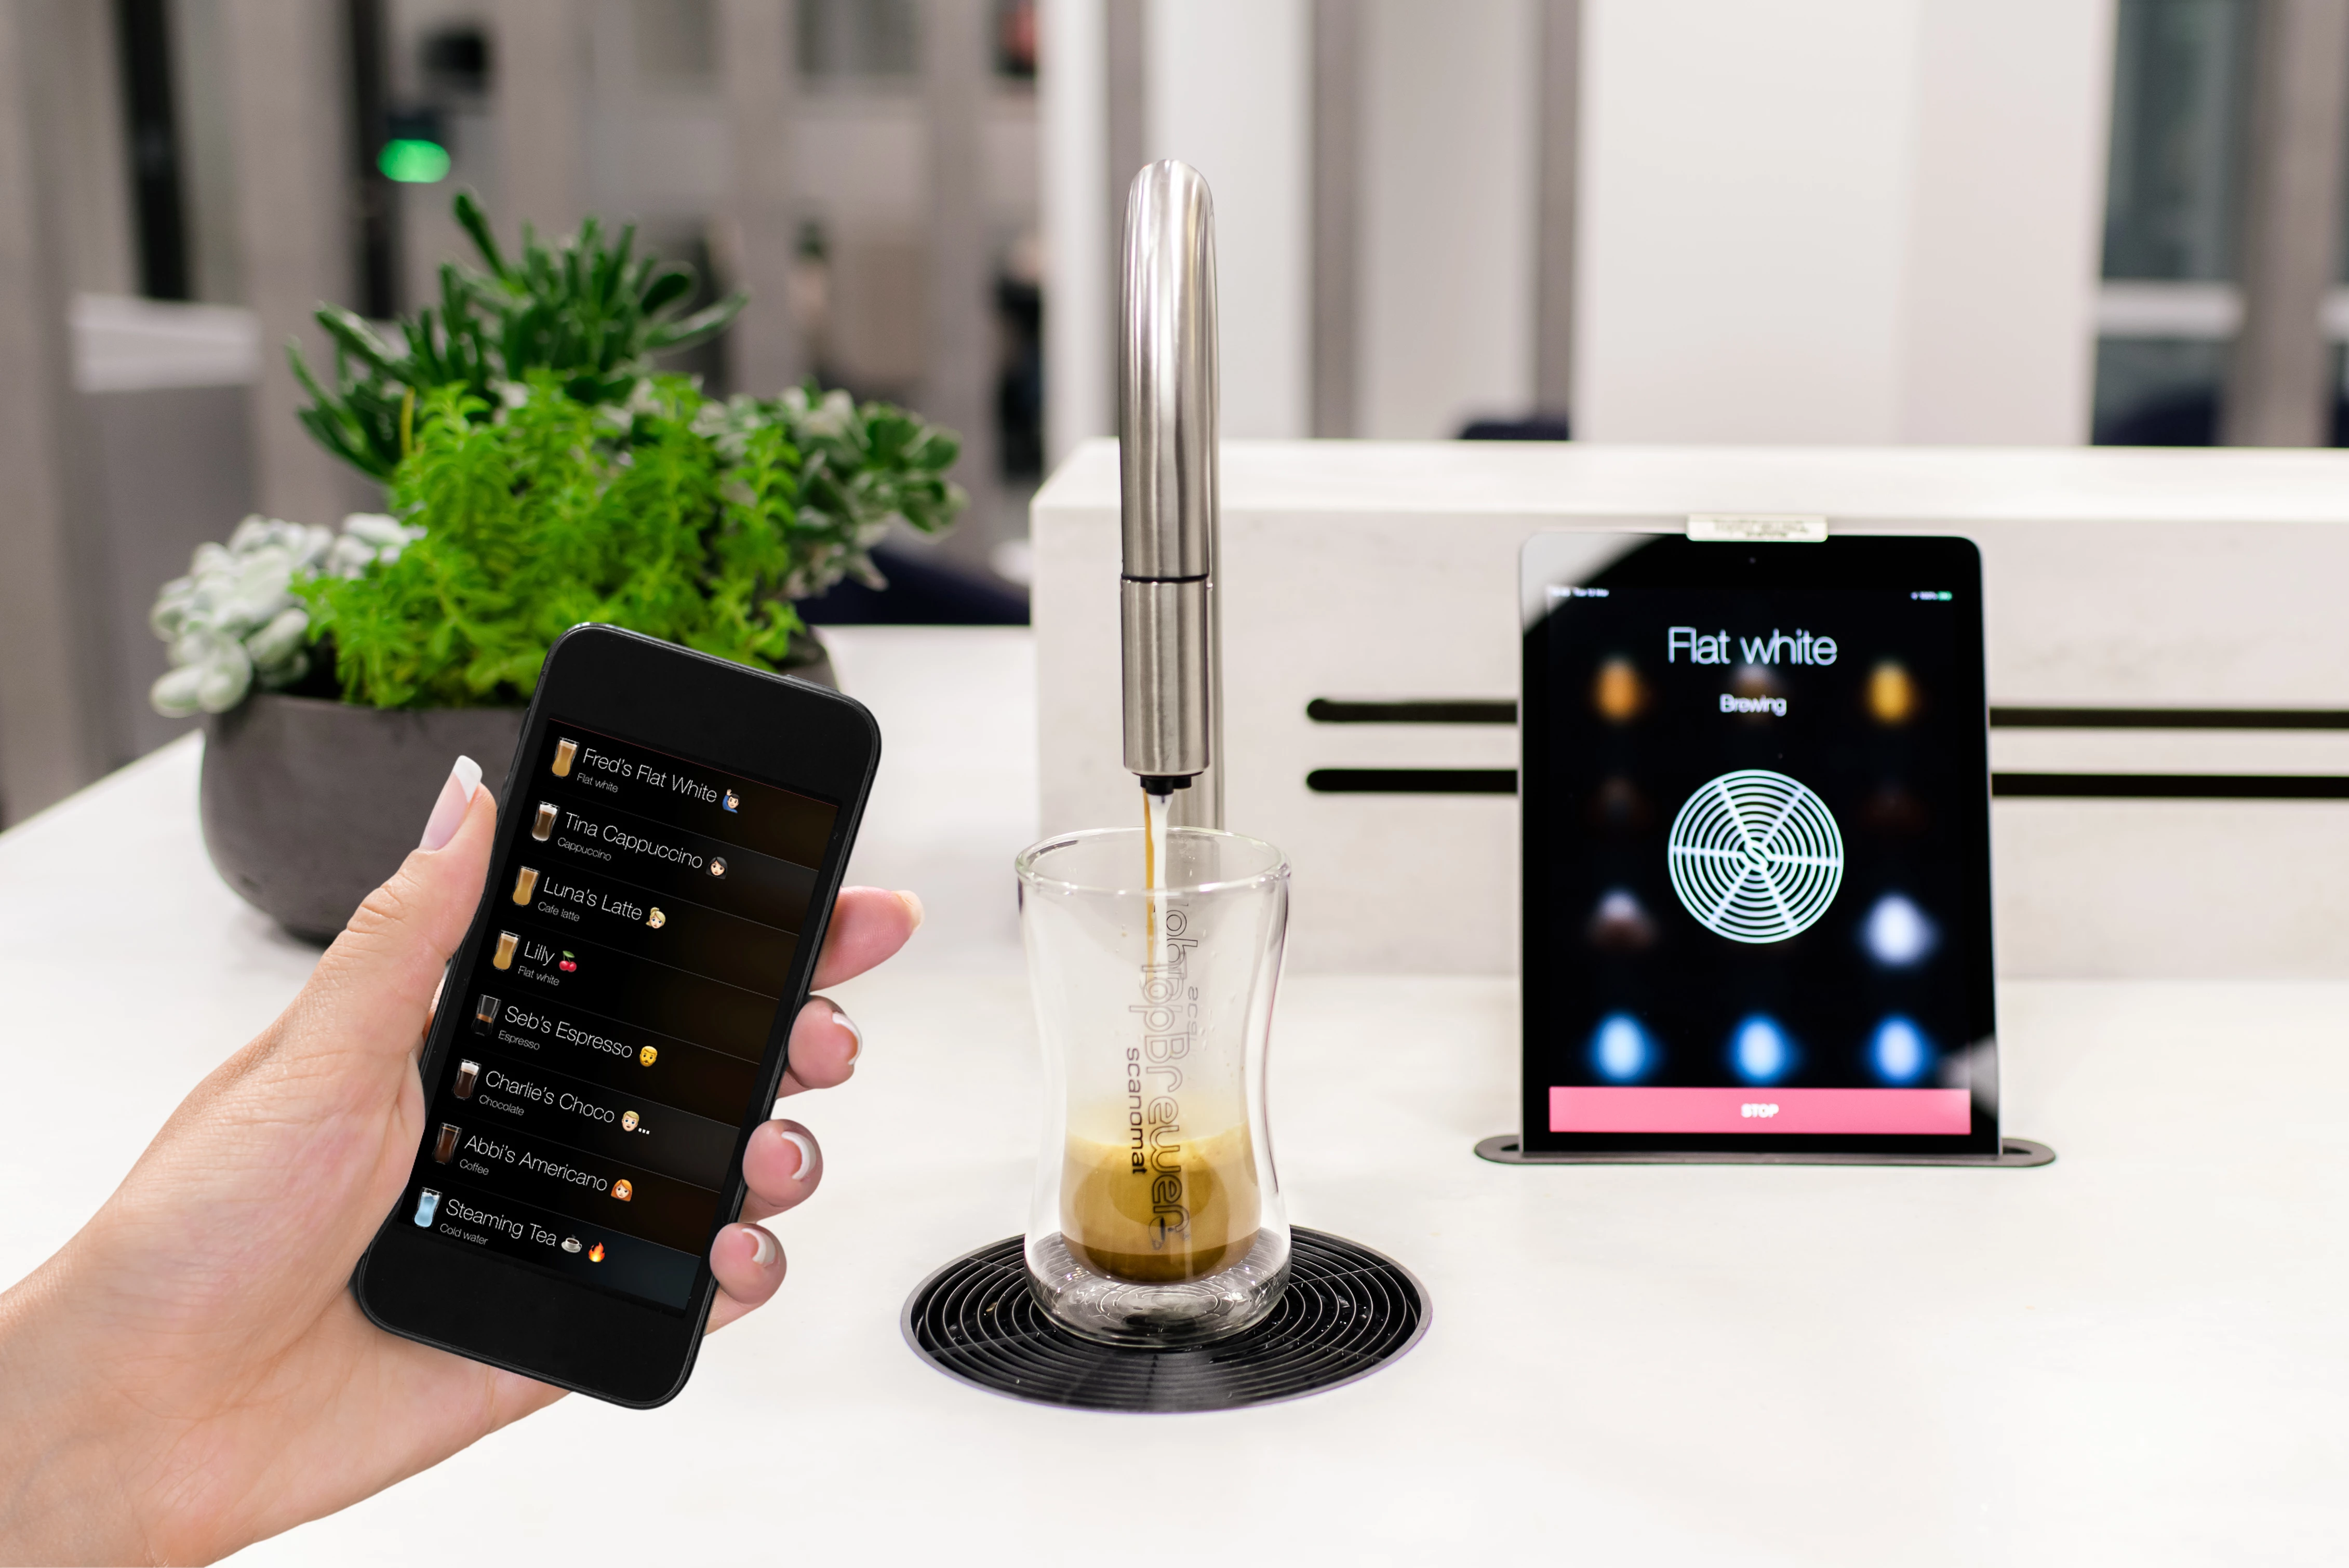 A premium, touchless coffee experience with TopBrewer